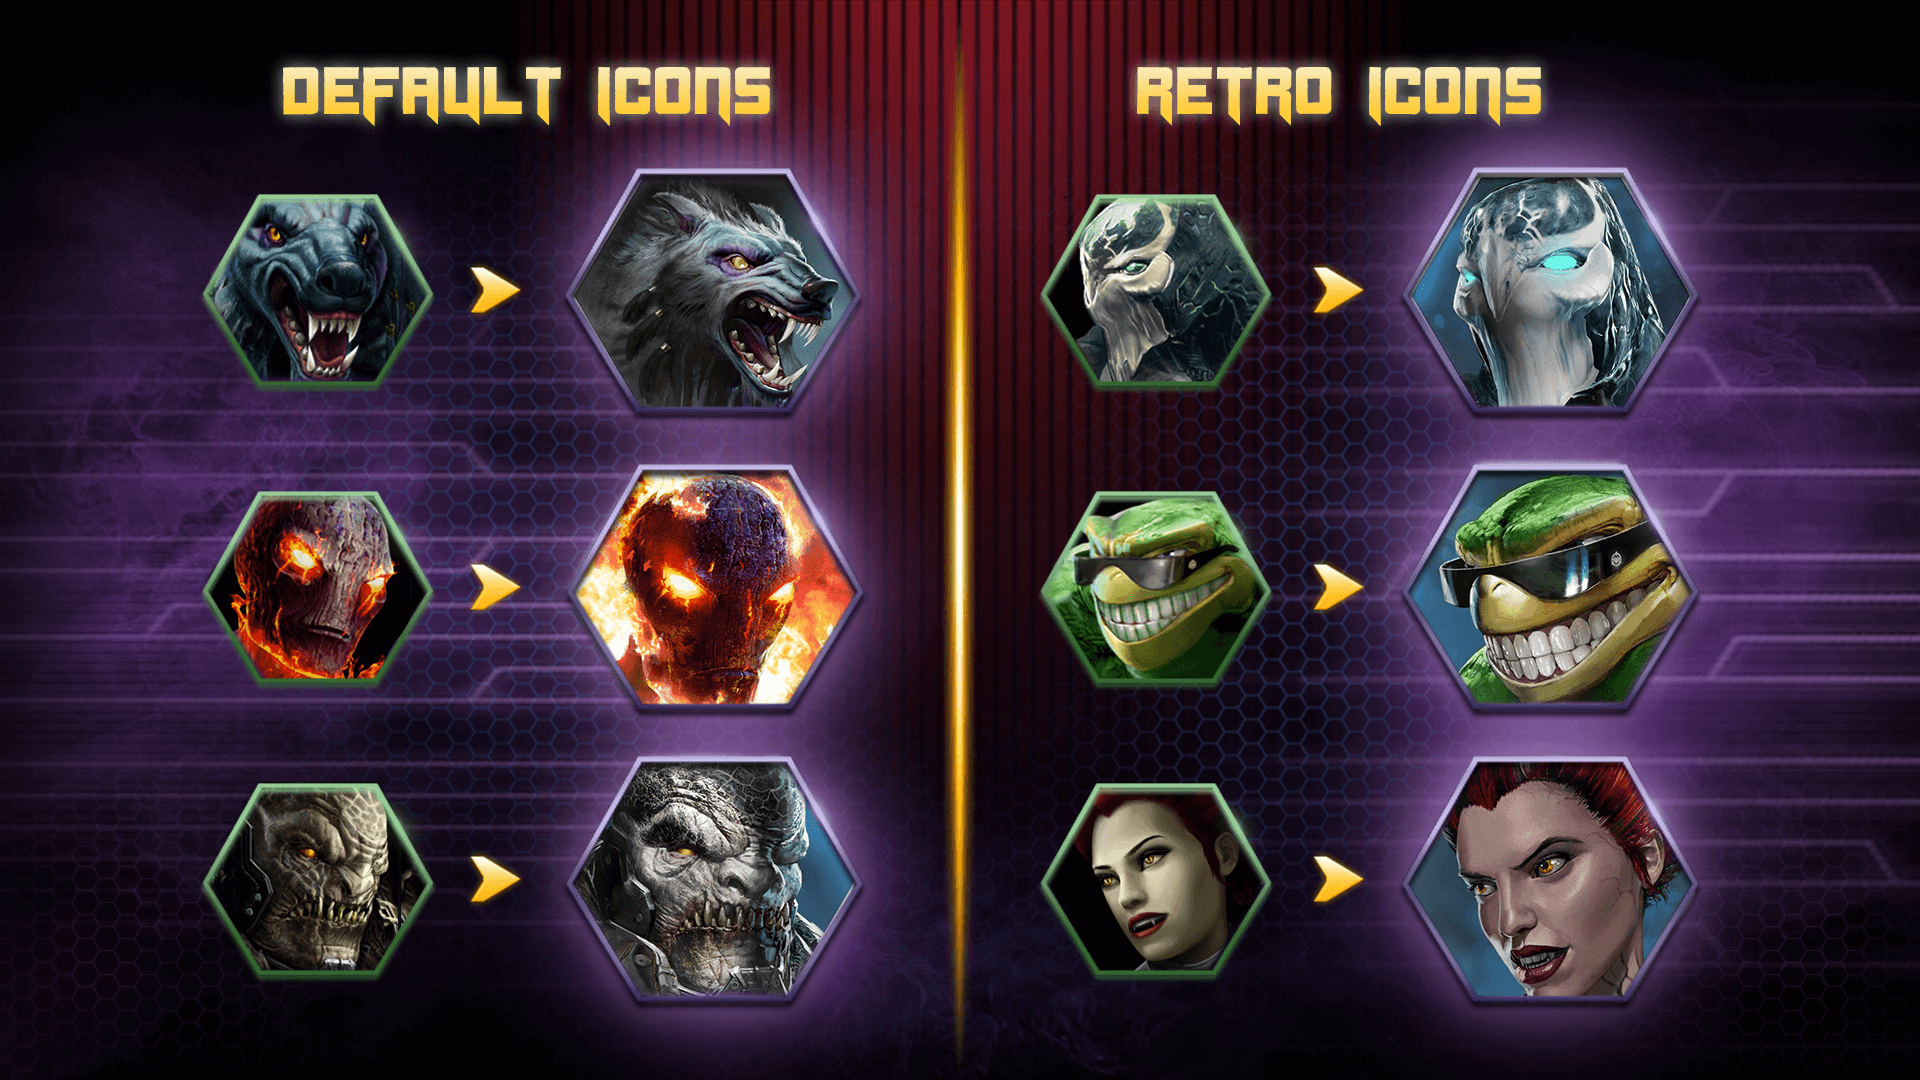 A comparison of previous and current default and retro icons, featuring Sabrewulf, Cinder, General RAAM, Glacius, Rash, and Mira